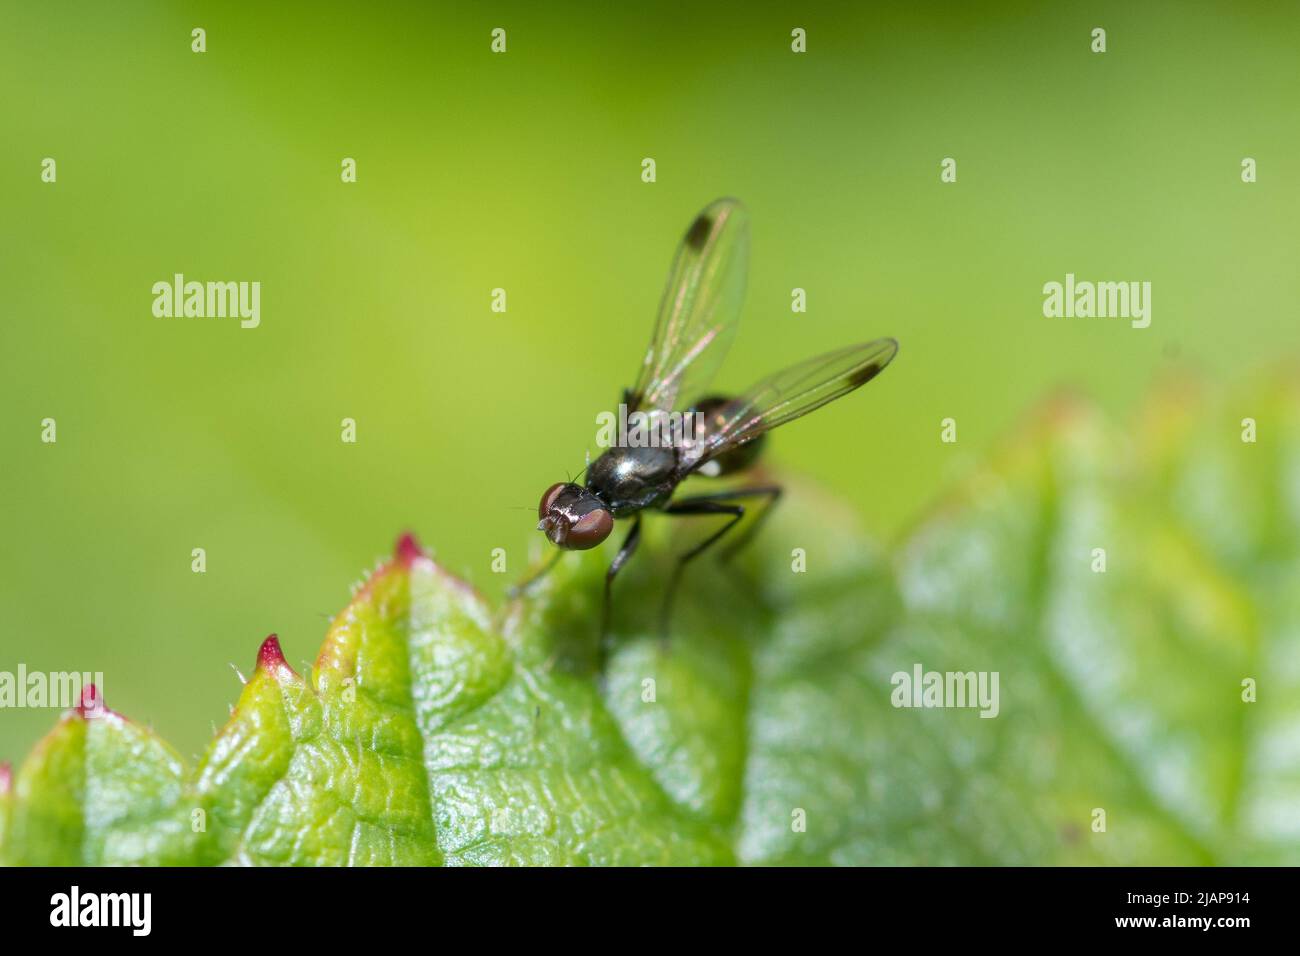 An unidentified fly. Taken at Hawthorn, Seaham, UK. Stock Photo